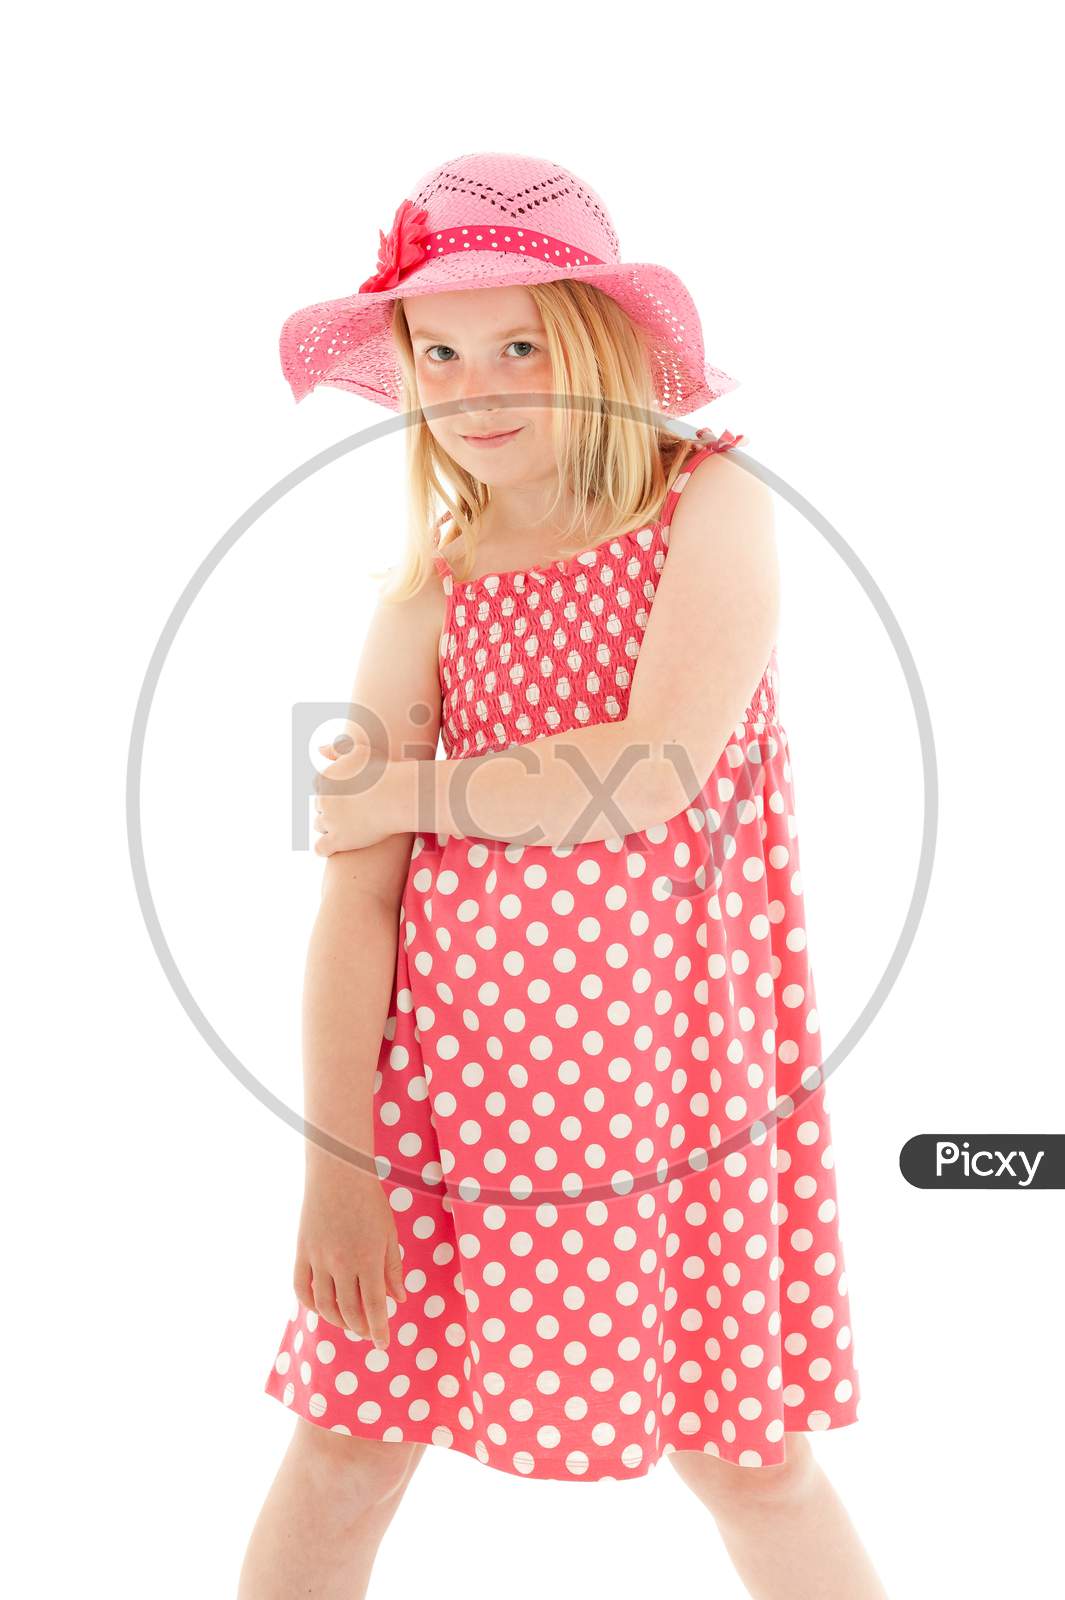 Beautiful Young Blonde Girl Wearing Big Pink Floppy Hat And A Polka Dot Dress. Isolated On White Studio Background